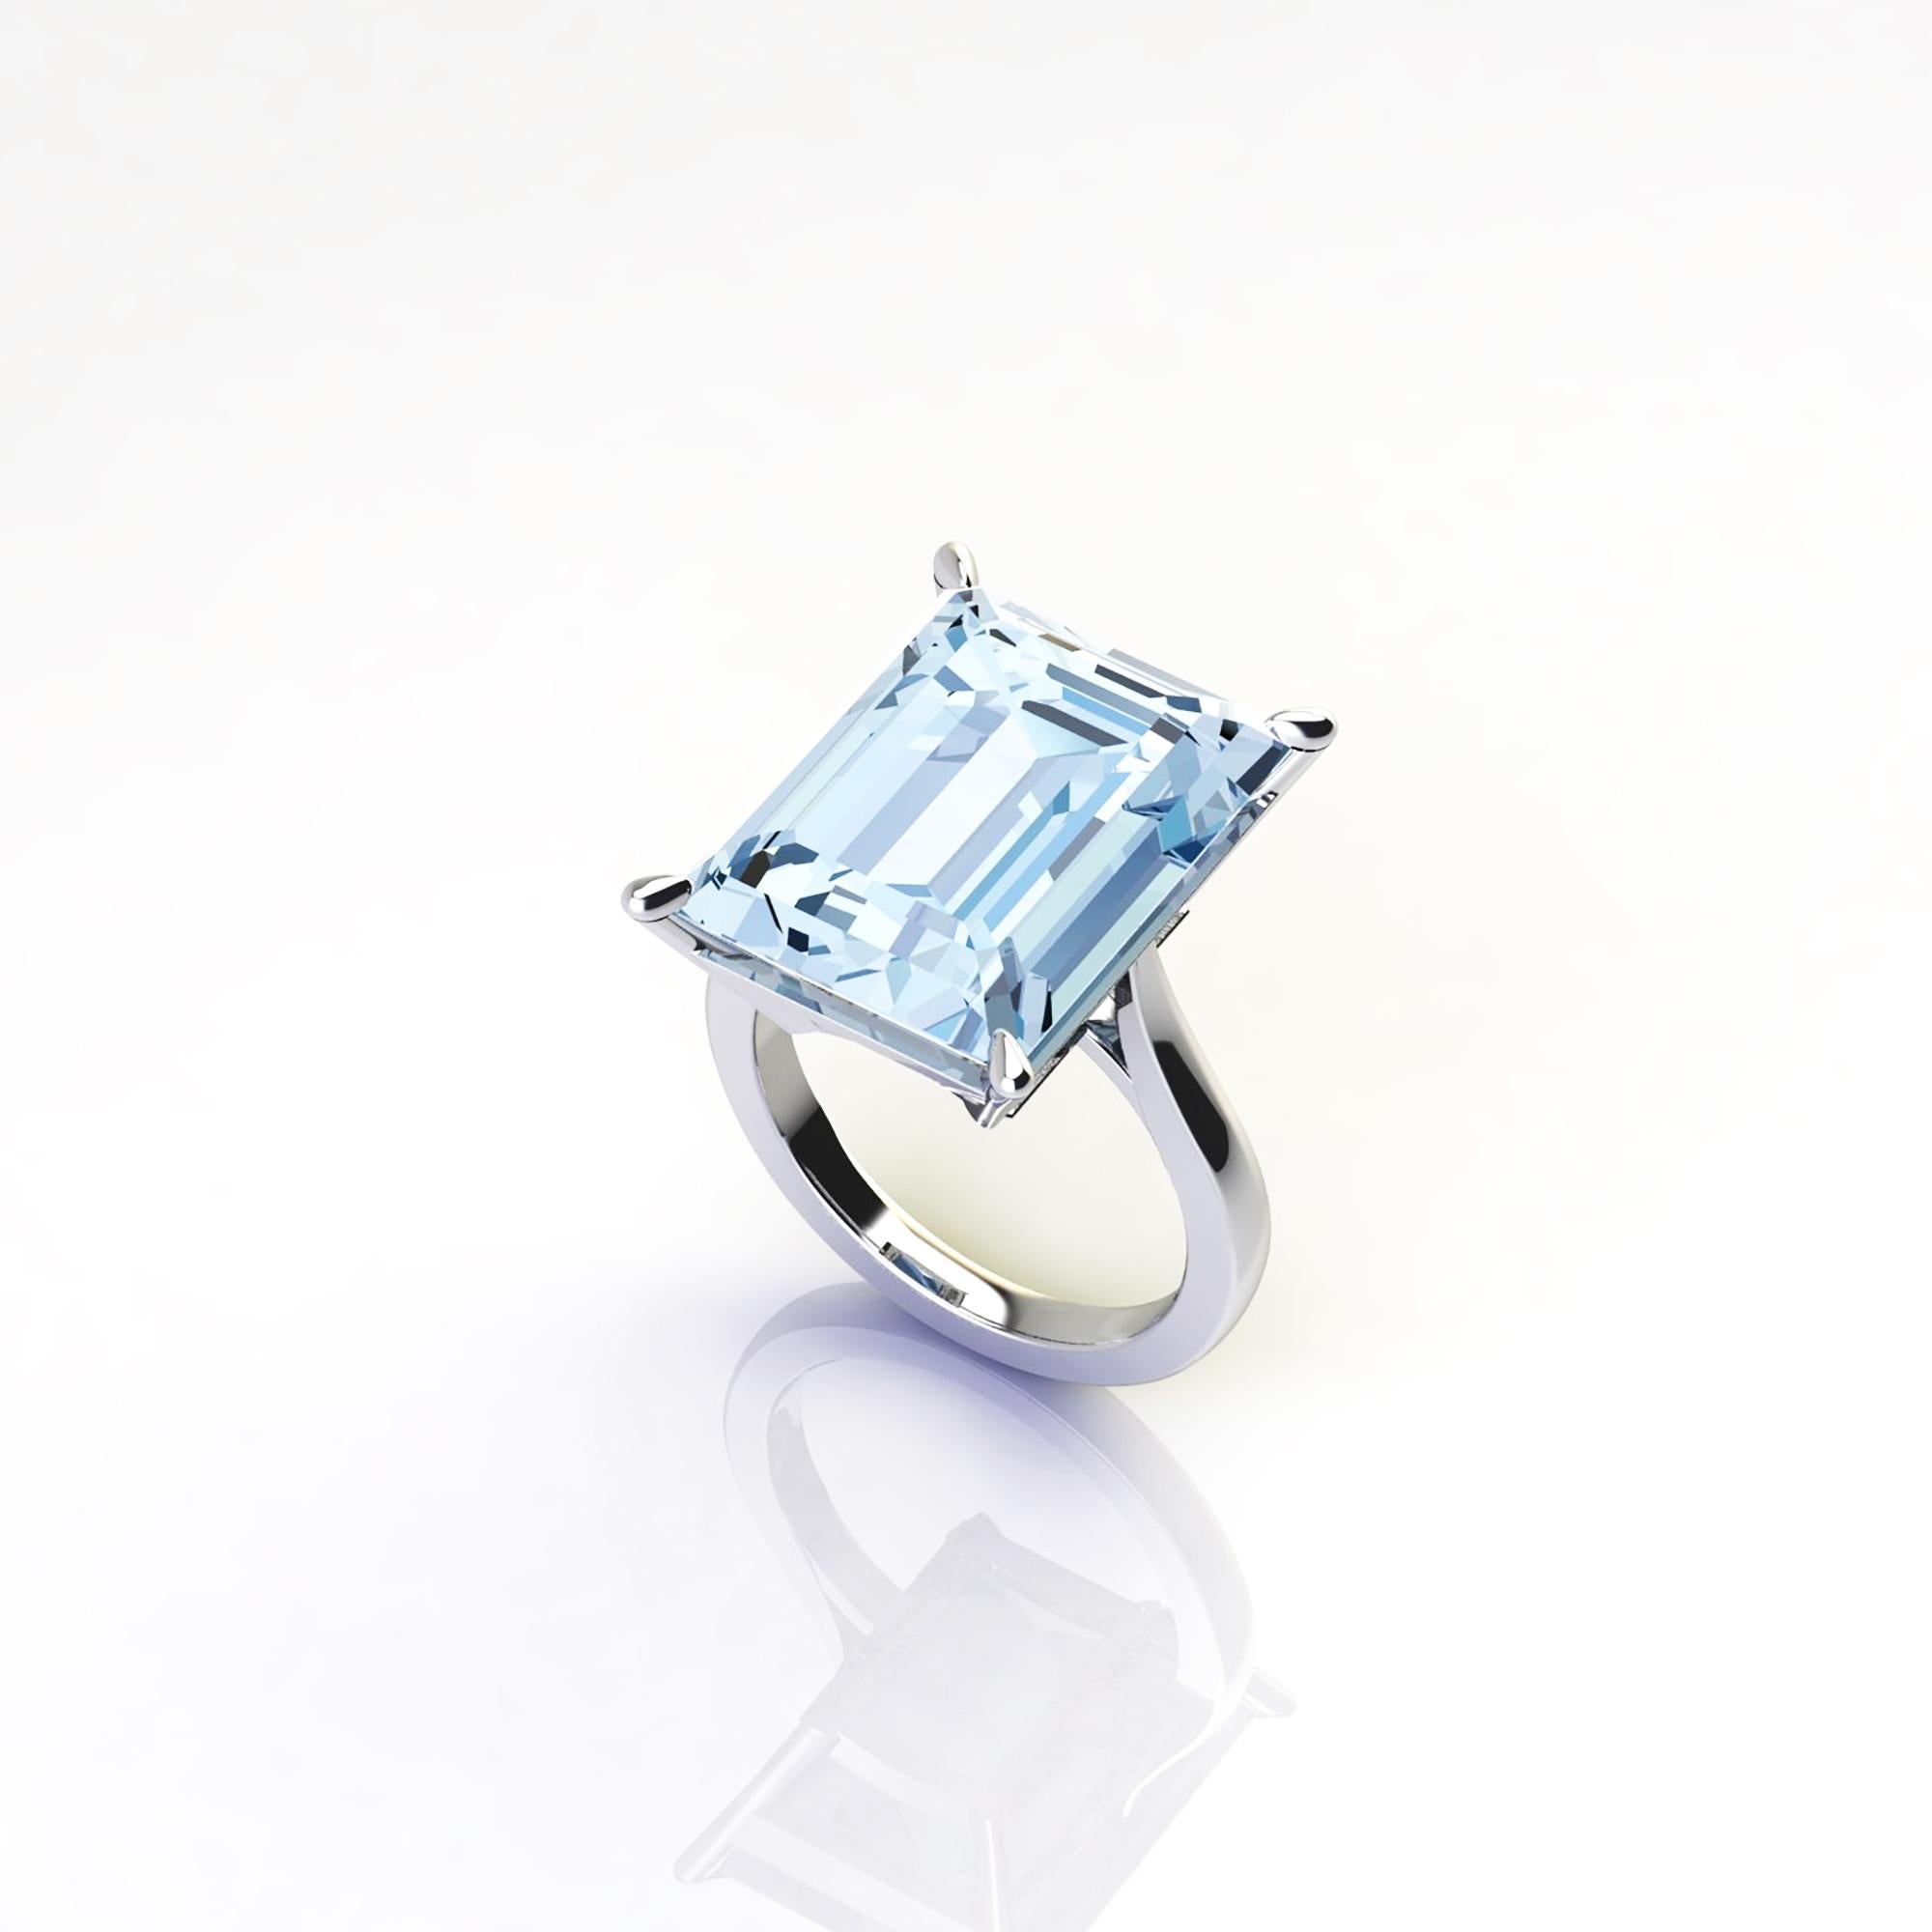 14.06 carat aquamarine, emerald set in an hand crafted, delicate and sophisticated looking Platinum 950 ring, manufactured with the best Italian manufacturing.
Complimentary GIA Certification upon order
This ring is made to order to guarantee its